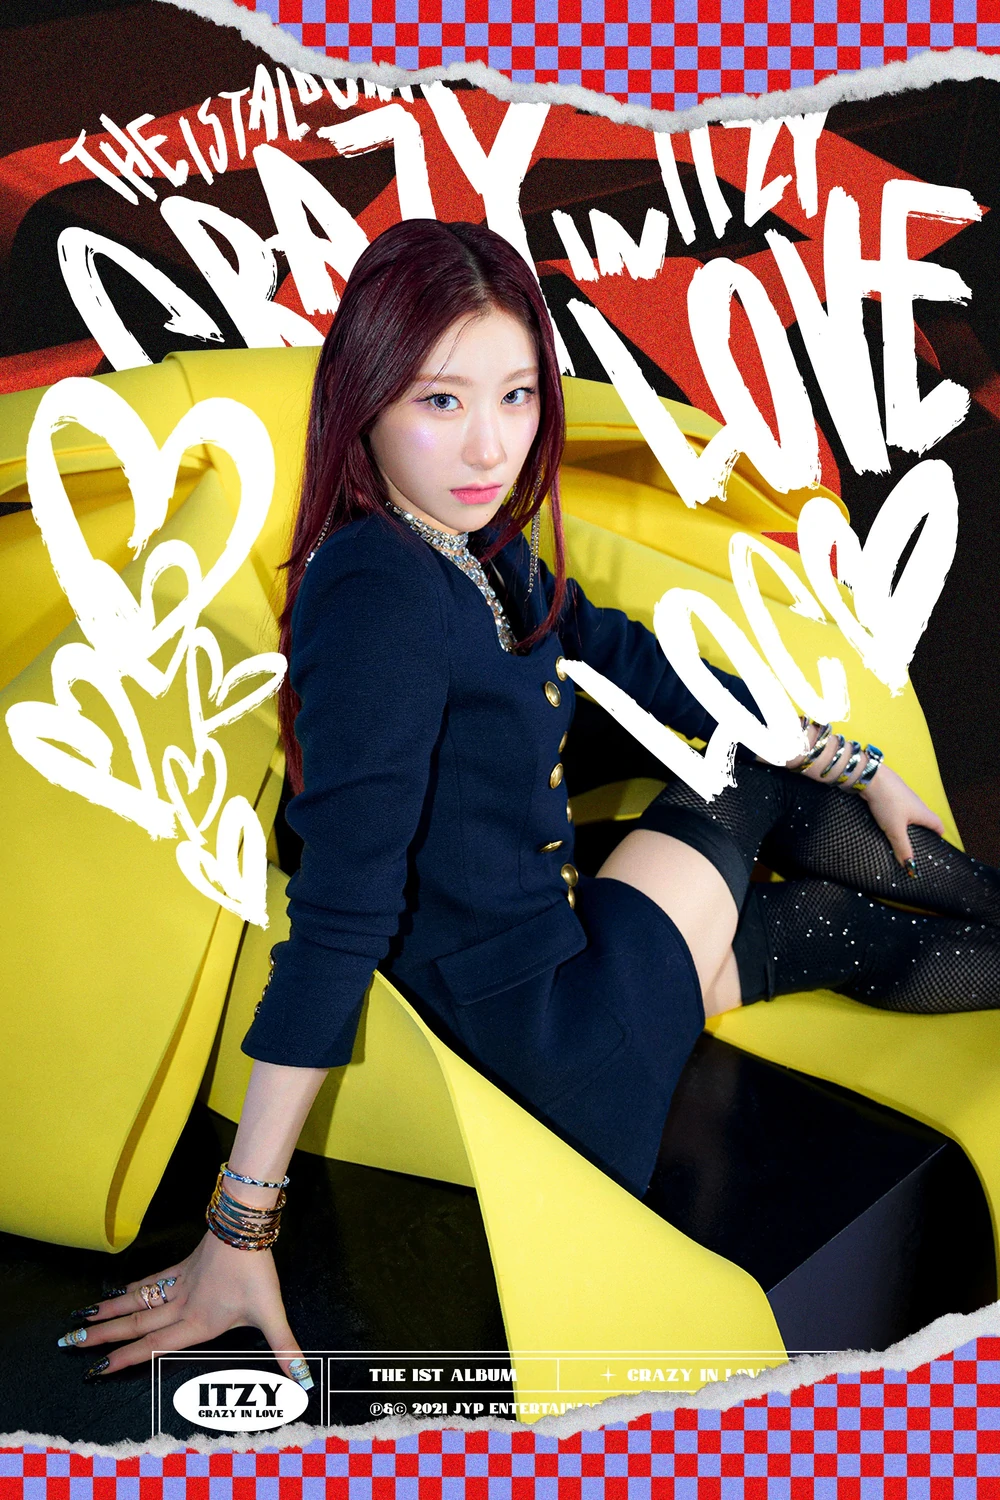 Itzy Crazy In Love Chaeryeong Concept Teaser Picture Image Photo Kpop K-Concept 1